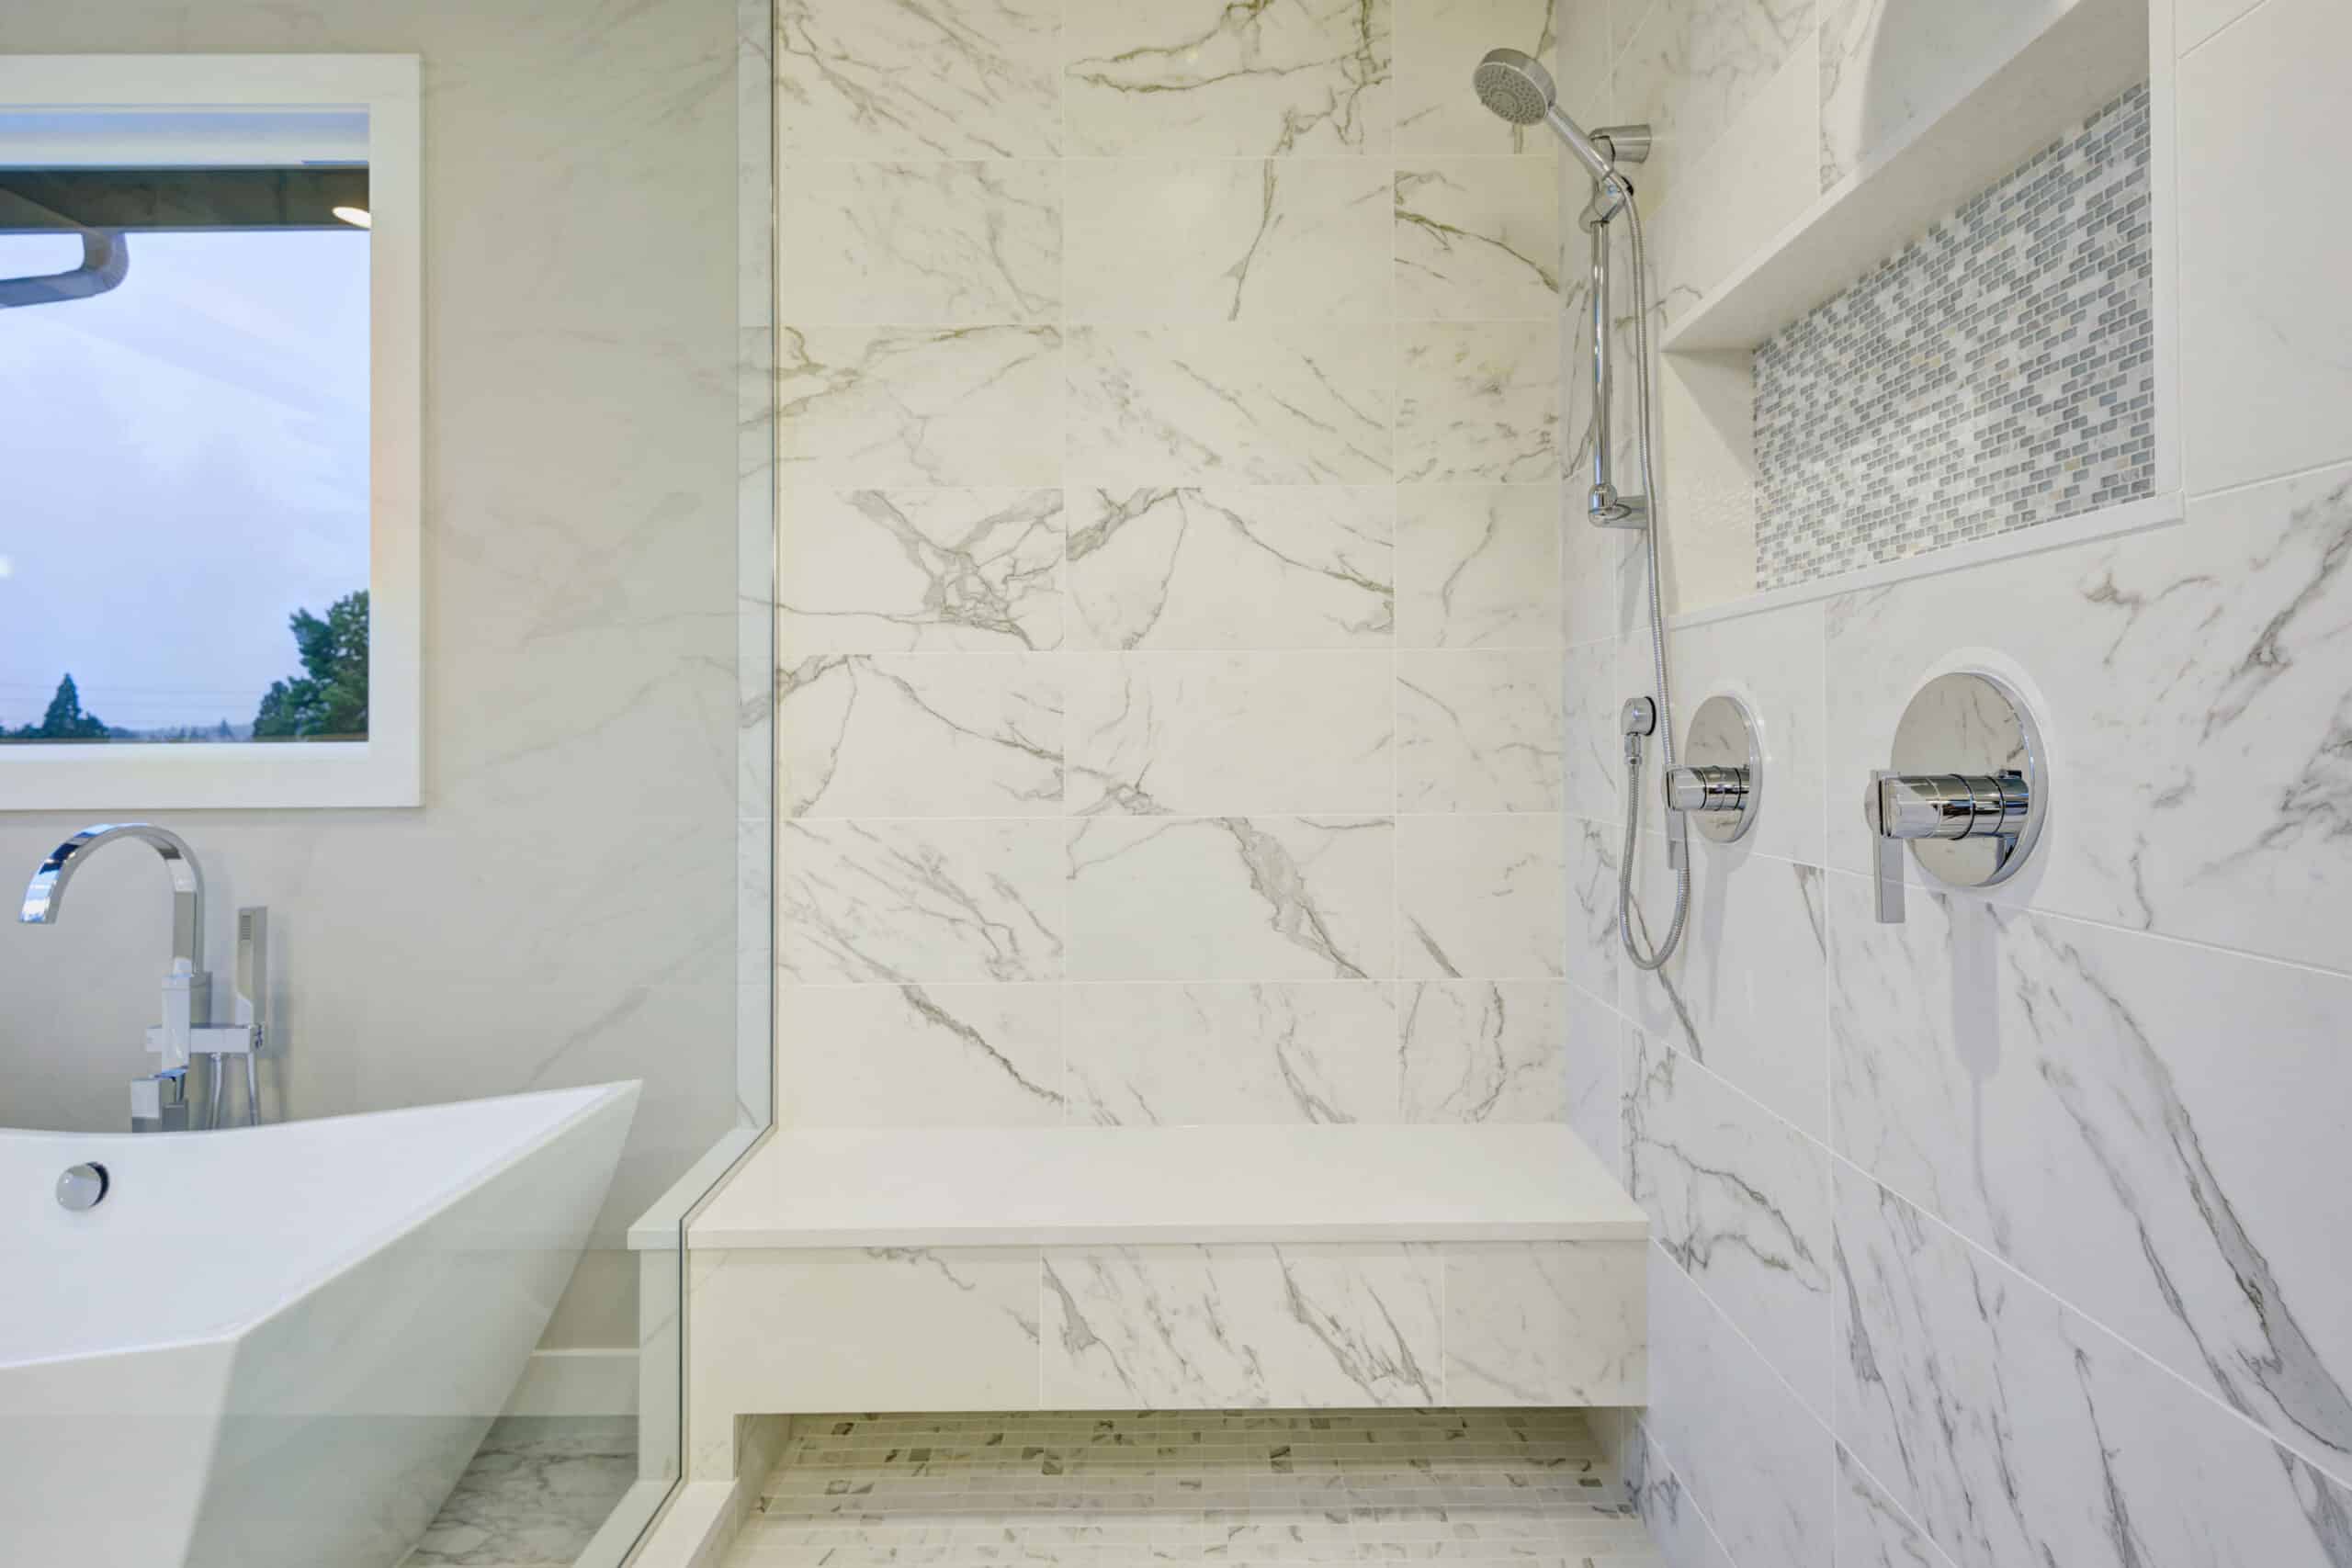 Sleek bathroom features freestanding bathtub and glass shower accented with rain shower head and gray and white marble surround.